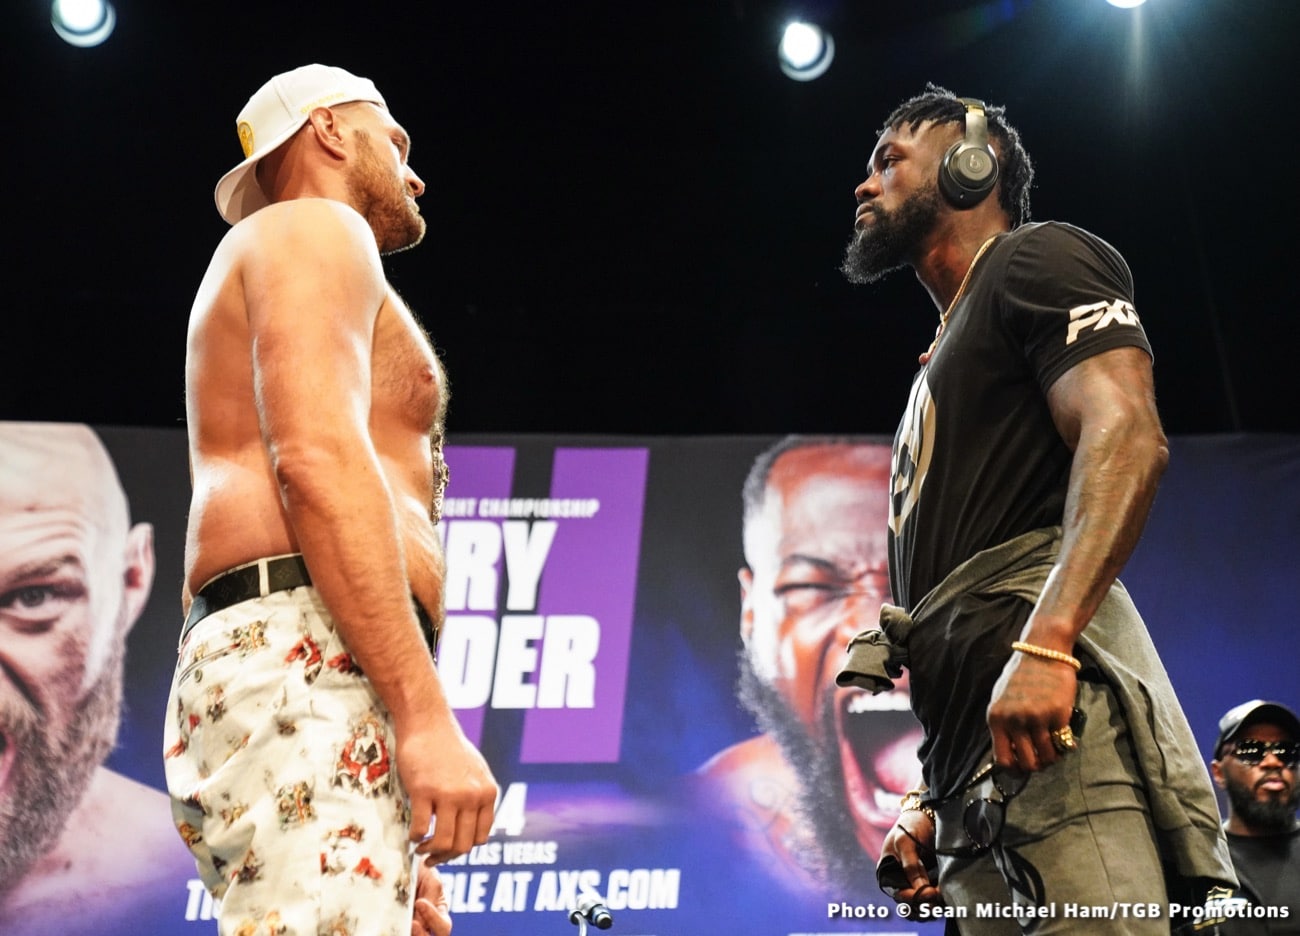 Image: 'This is the end of Deontay Wilder' predicts Tyson Fury